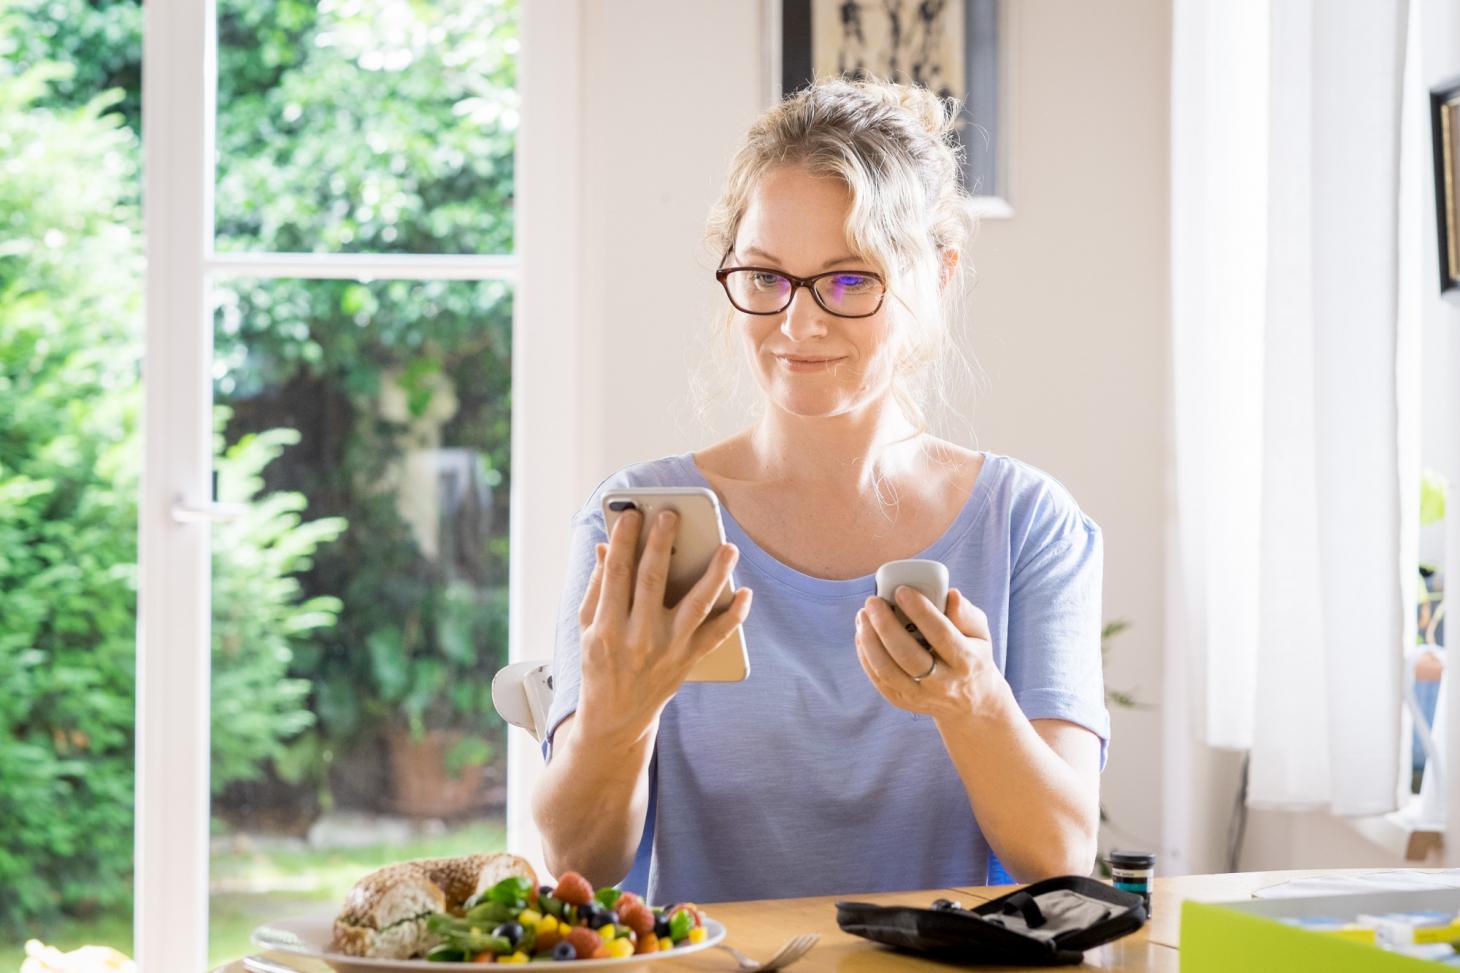 Woman wearing purple shirt and wearing glasses sitting at table next to window. Holding phone and Accu-Chek® Guide meter and there is a plate of food, half a bagel and a salad on the table. There are test strips on the table as well and the corner of the Bundle box.